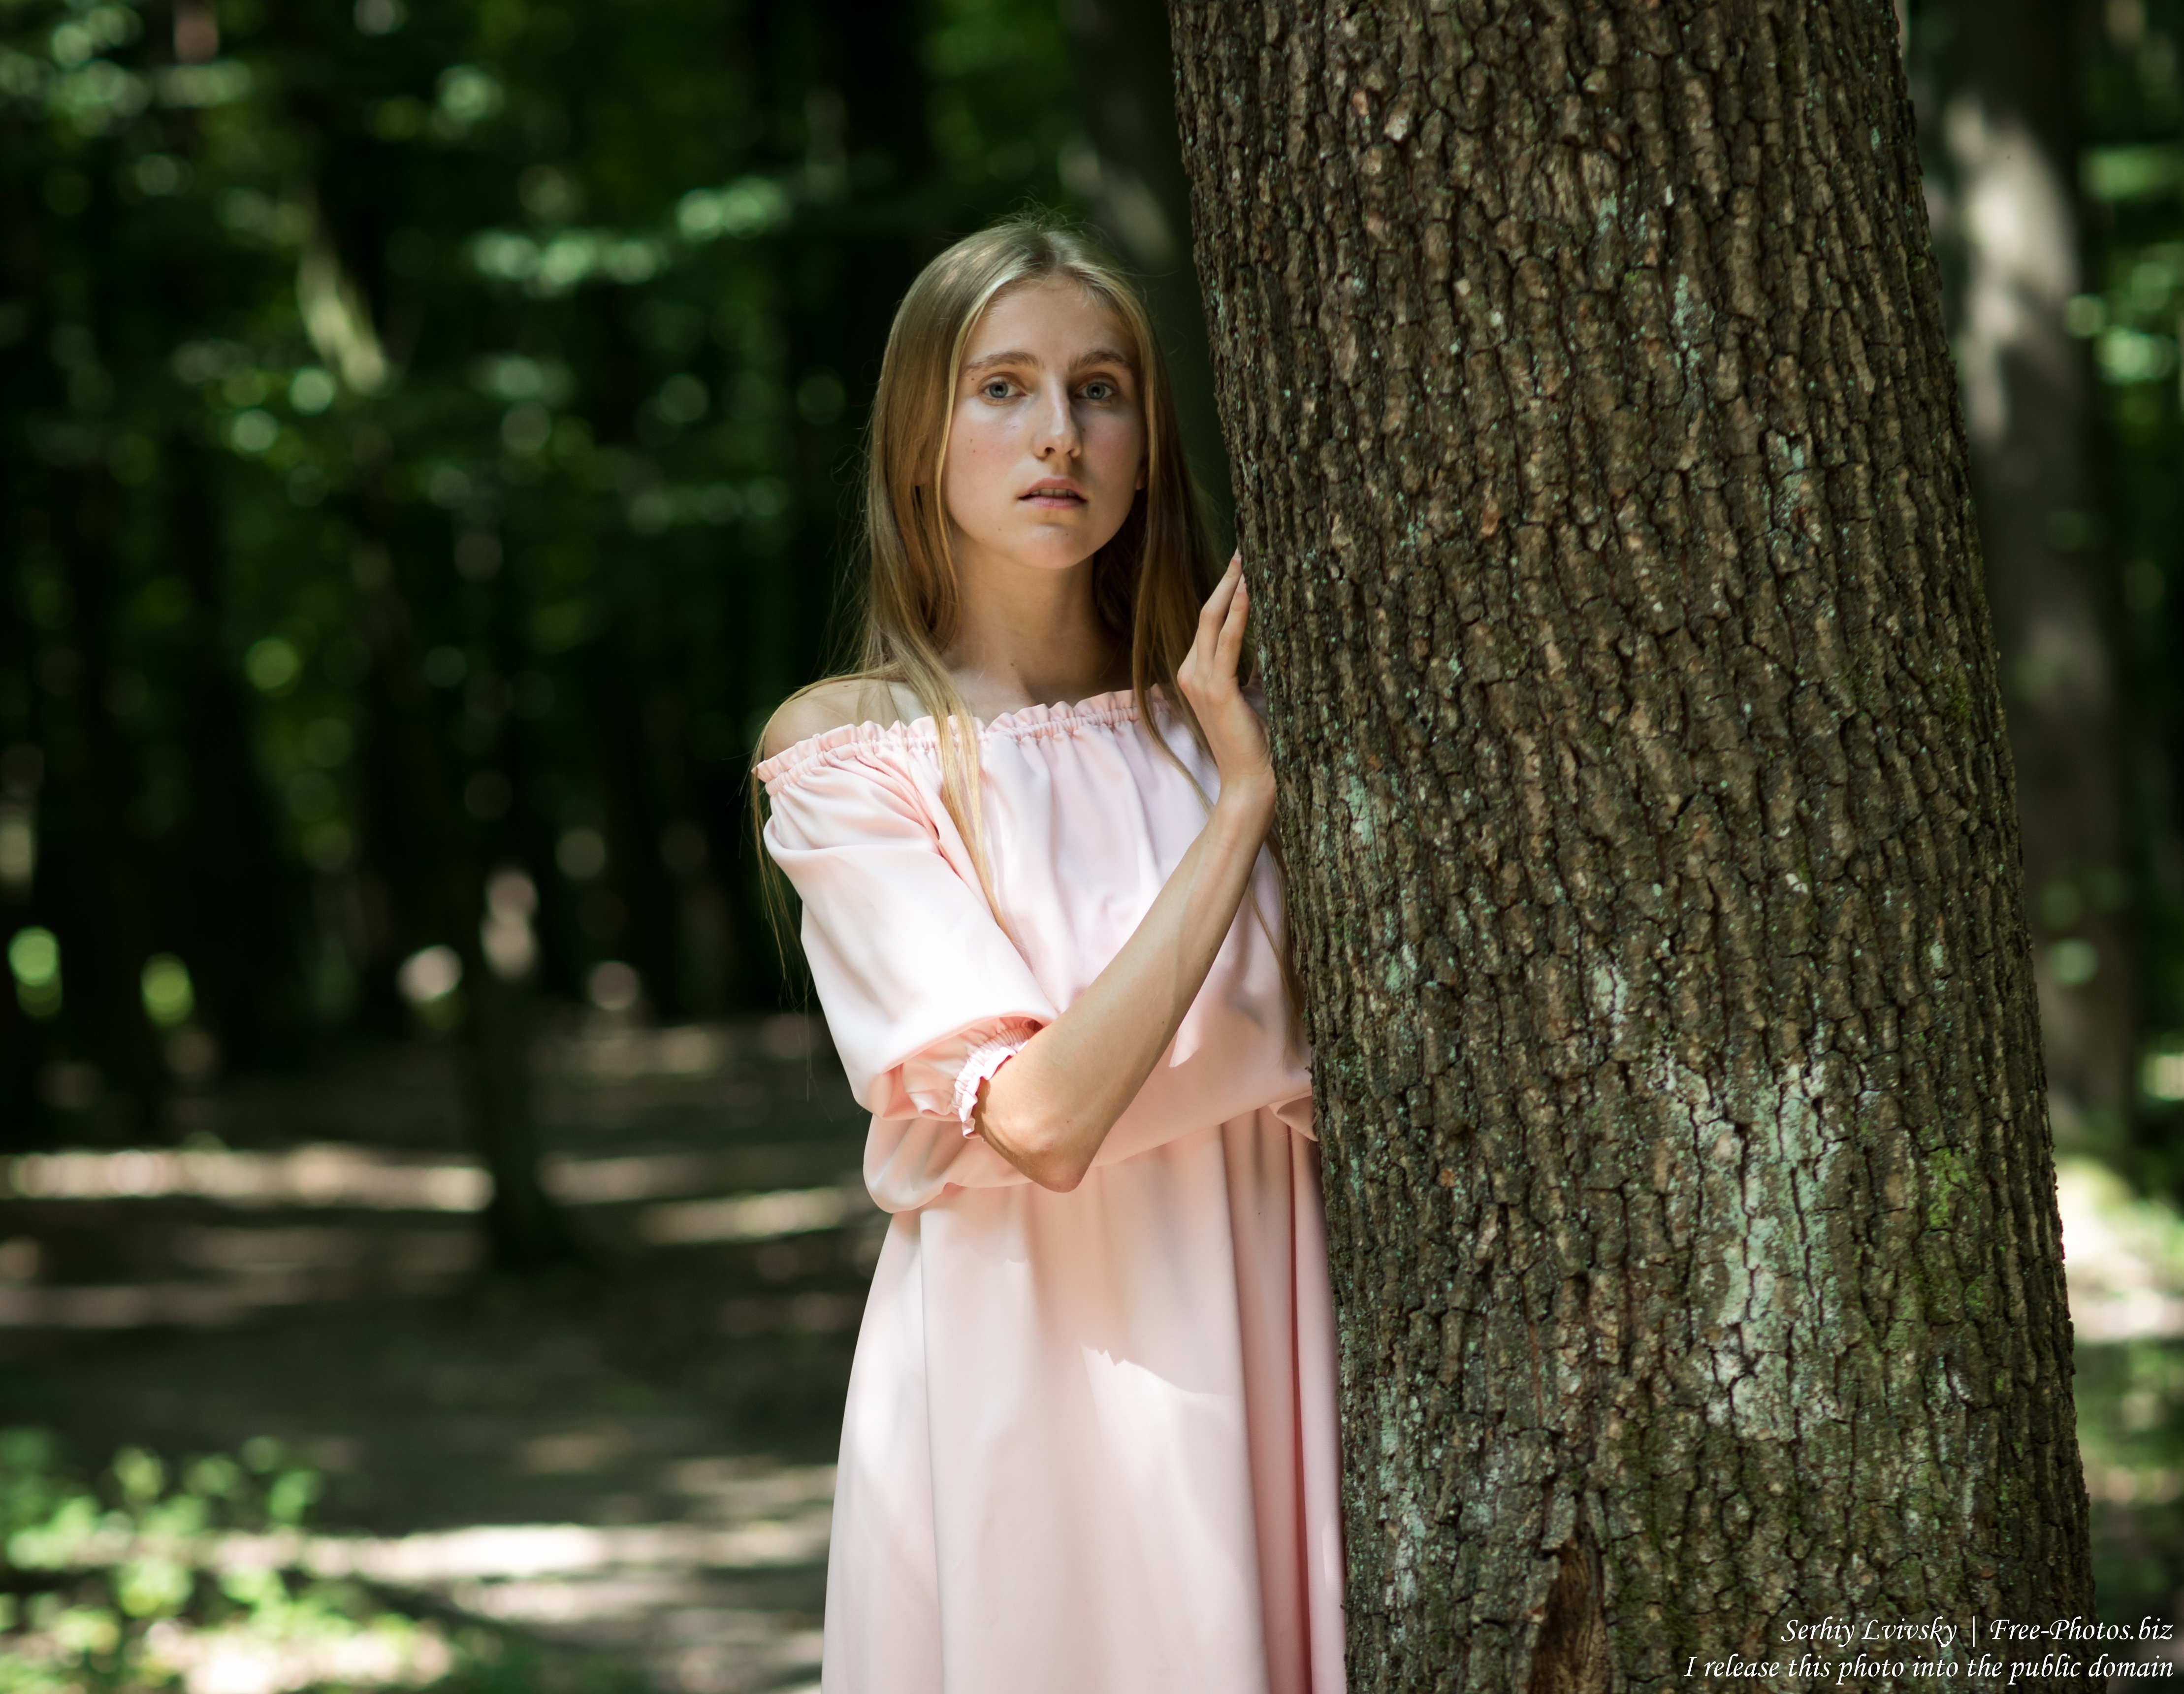 Katia - a 16-year-old natural blonde girl with blue eyes photographed in June 2019 by Serhiy Lvivsky, picture 10